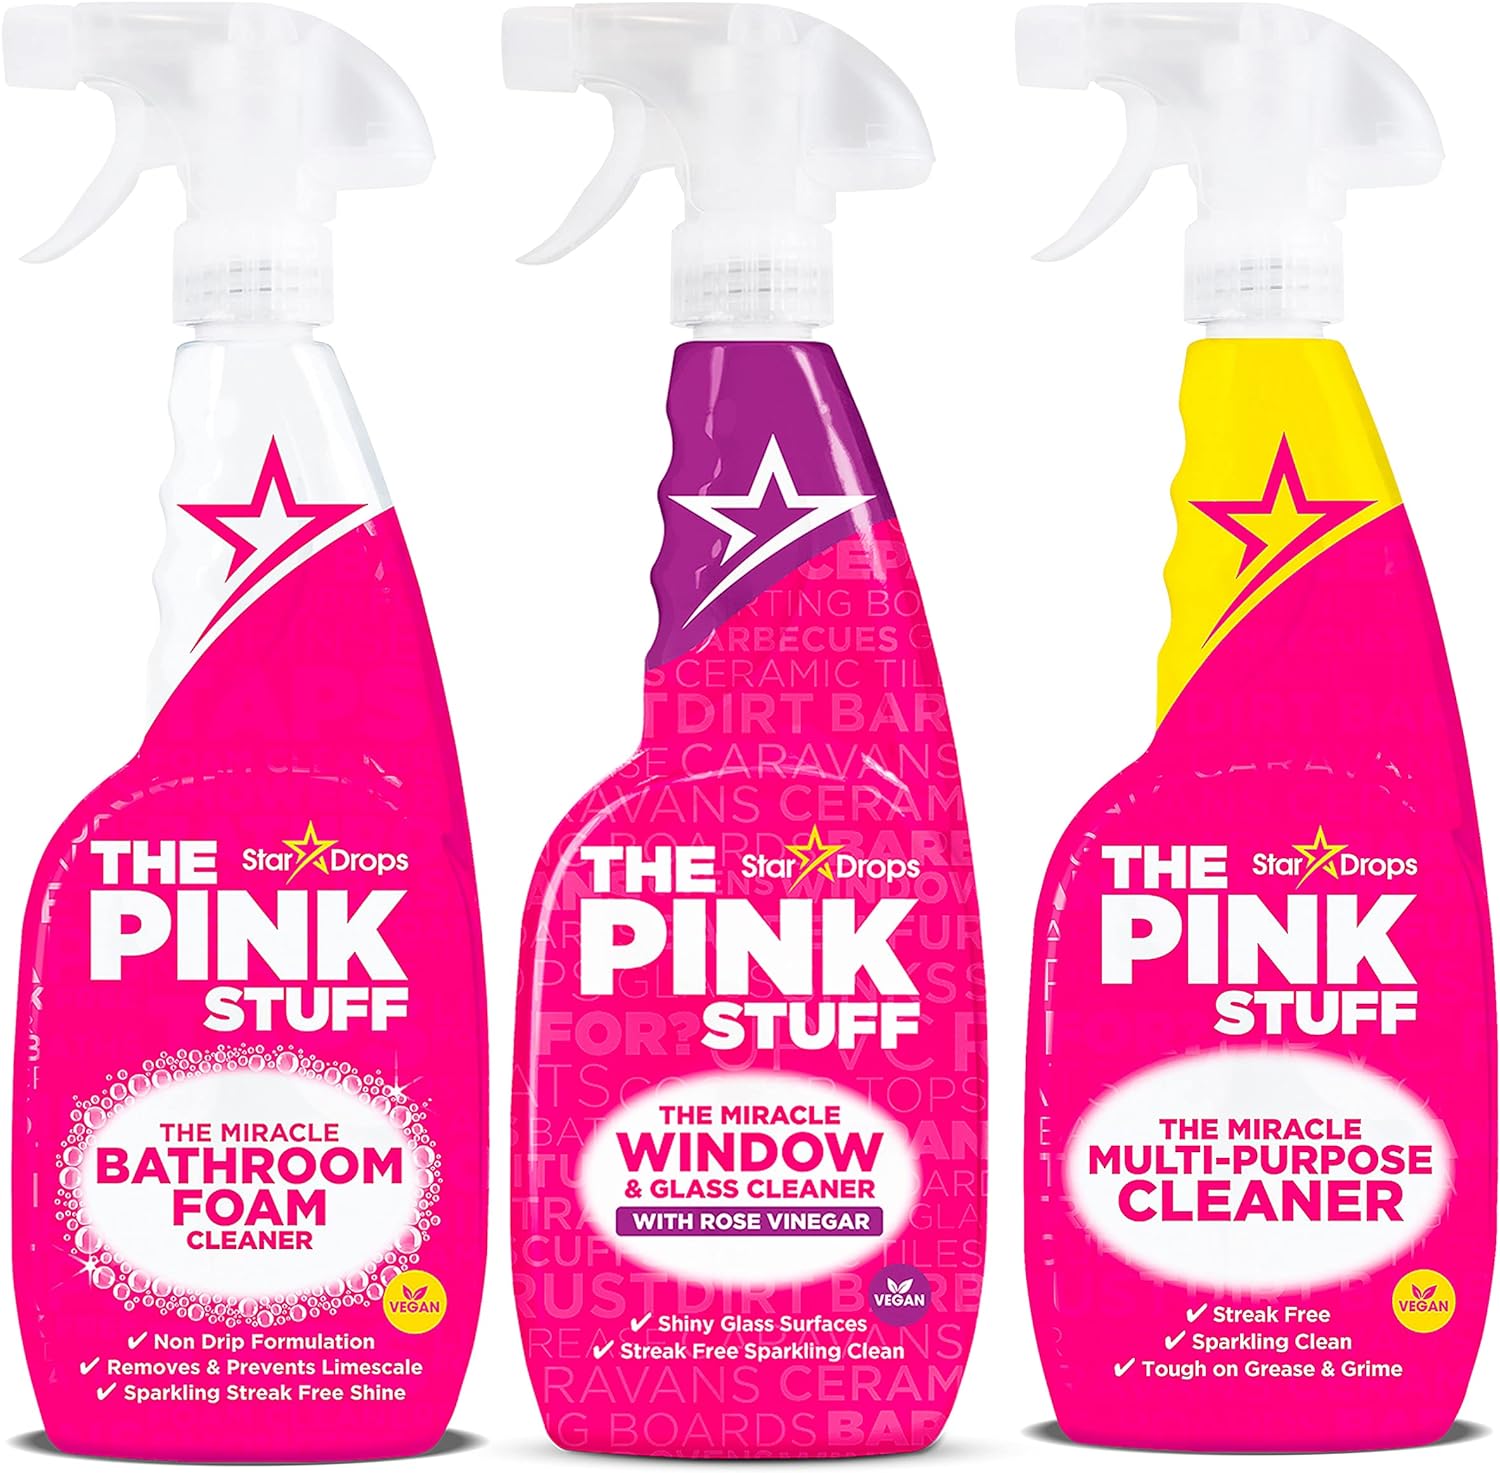 Stardrops - The Pink Stuff - The Miracle Multi-Purpose Spray, Window & Glass Cleaner, and Bathroom Foam Spray Bundle (1 Multi-Purpose Spray, 1 Window & Glass Cleaner, 1 Foam Spray)